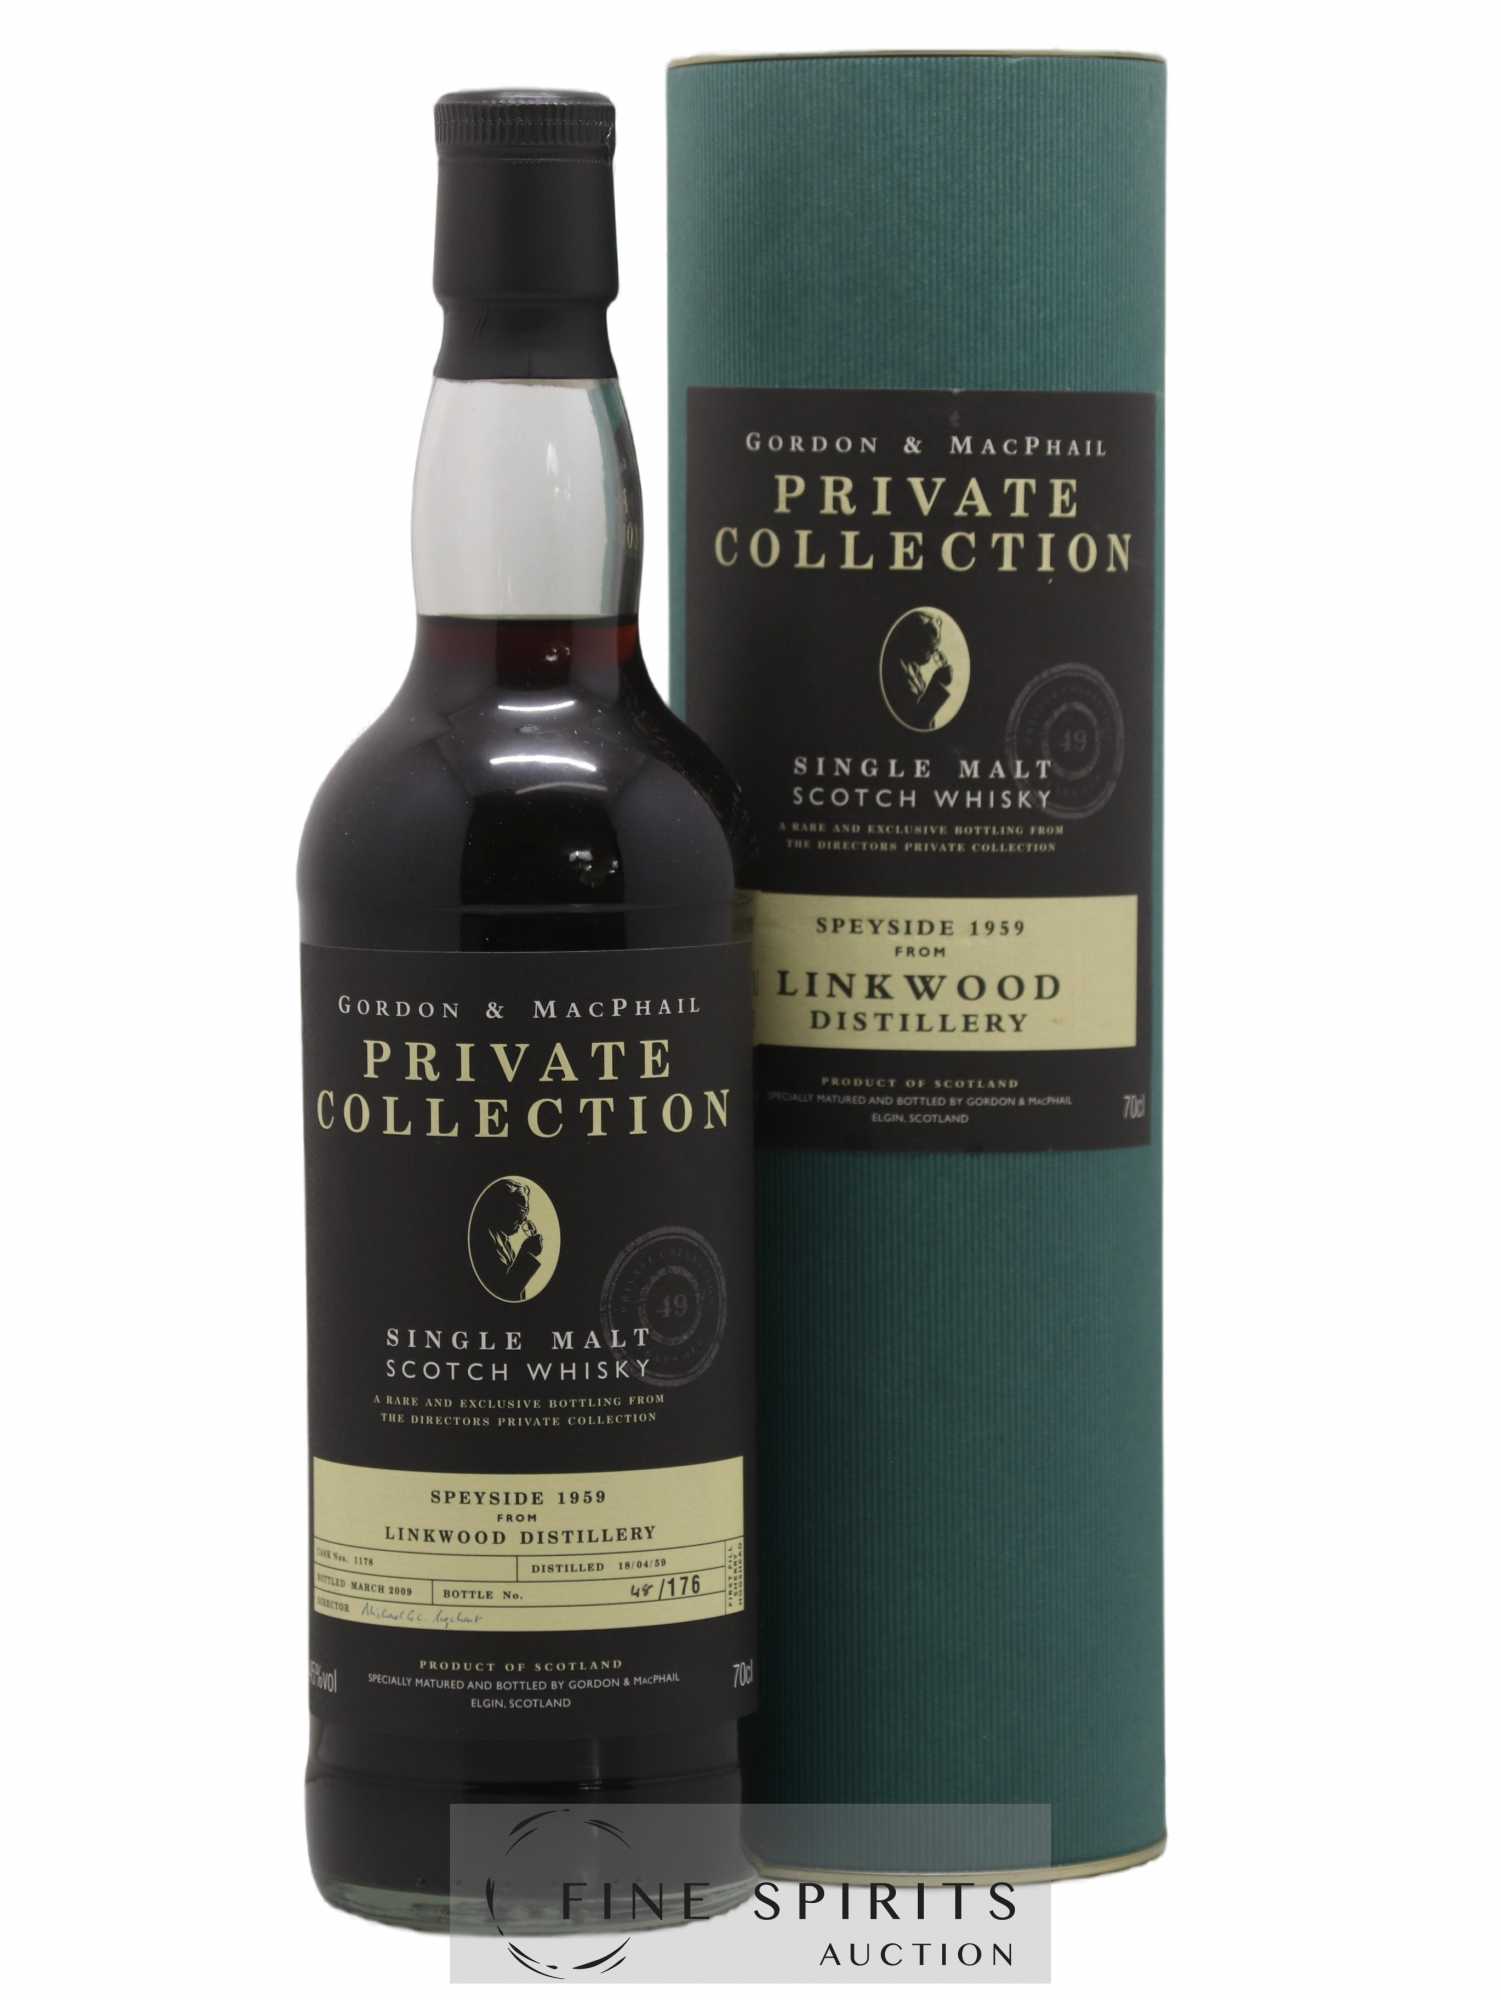 Linkwood 49 years 1959 Gordon & Macphail Cask n°1178 - One of 176 - bottled 2009 Private Collection 